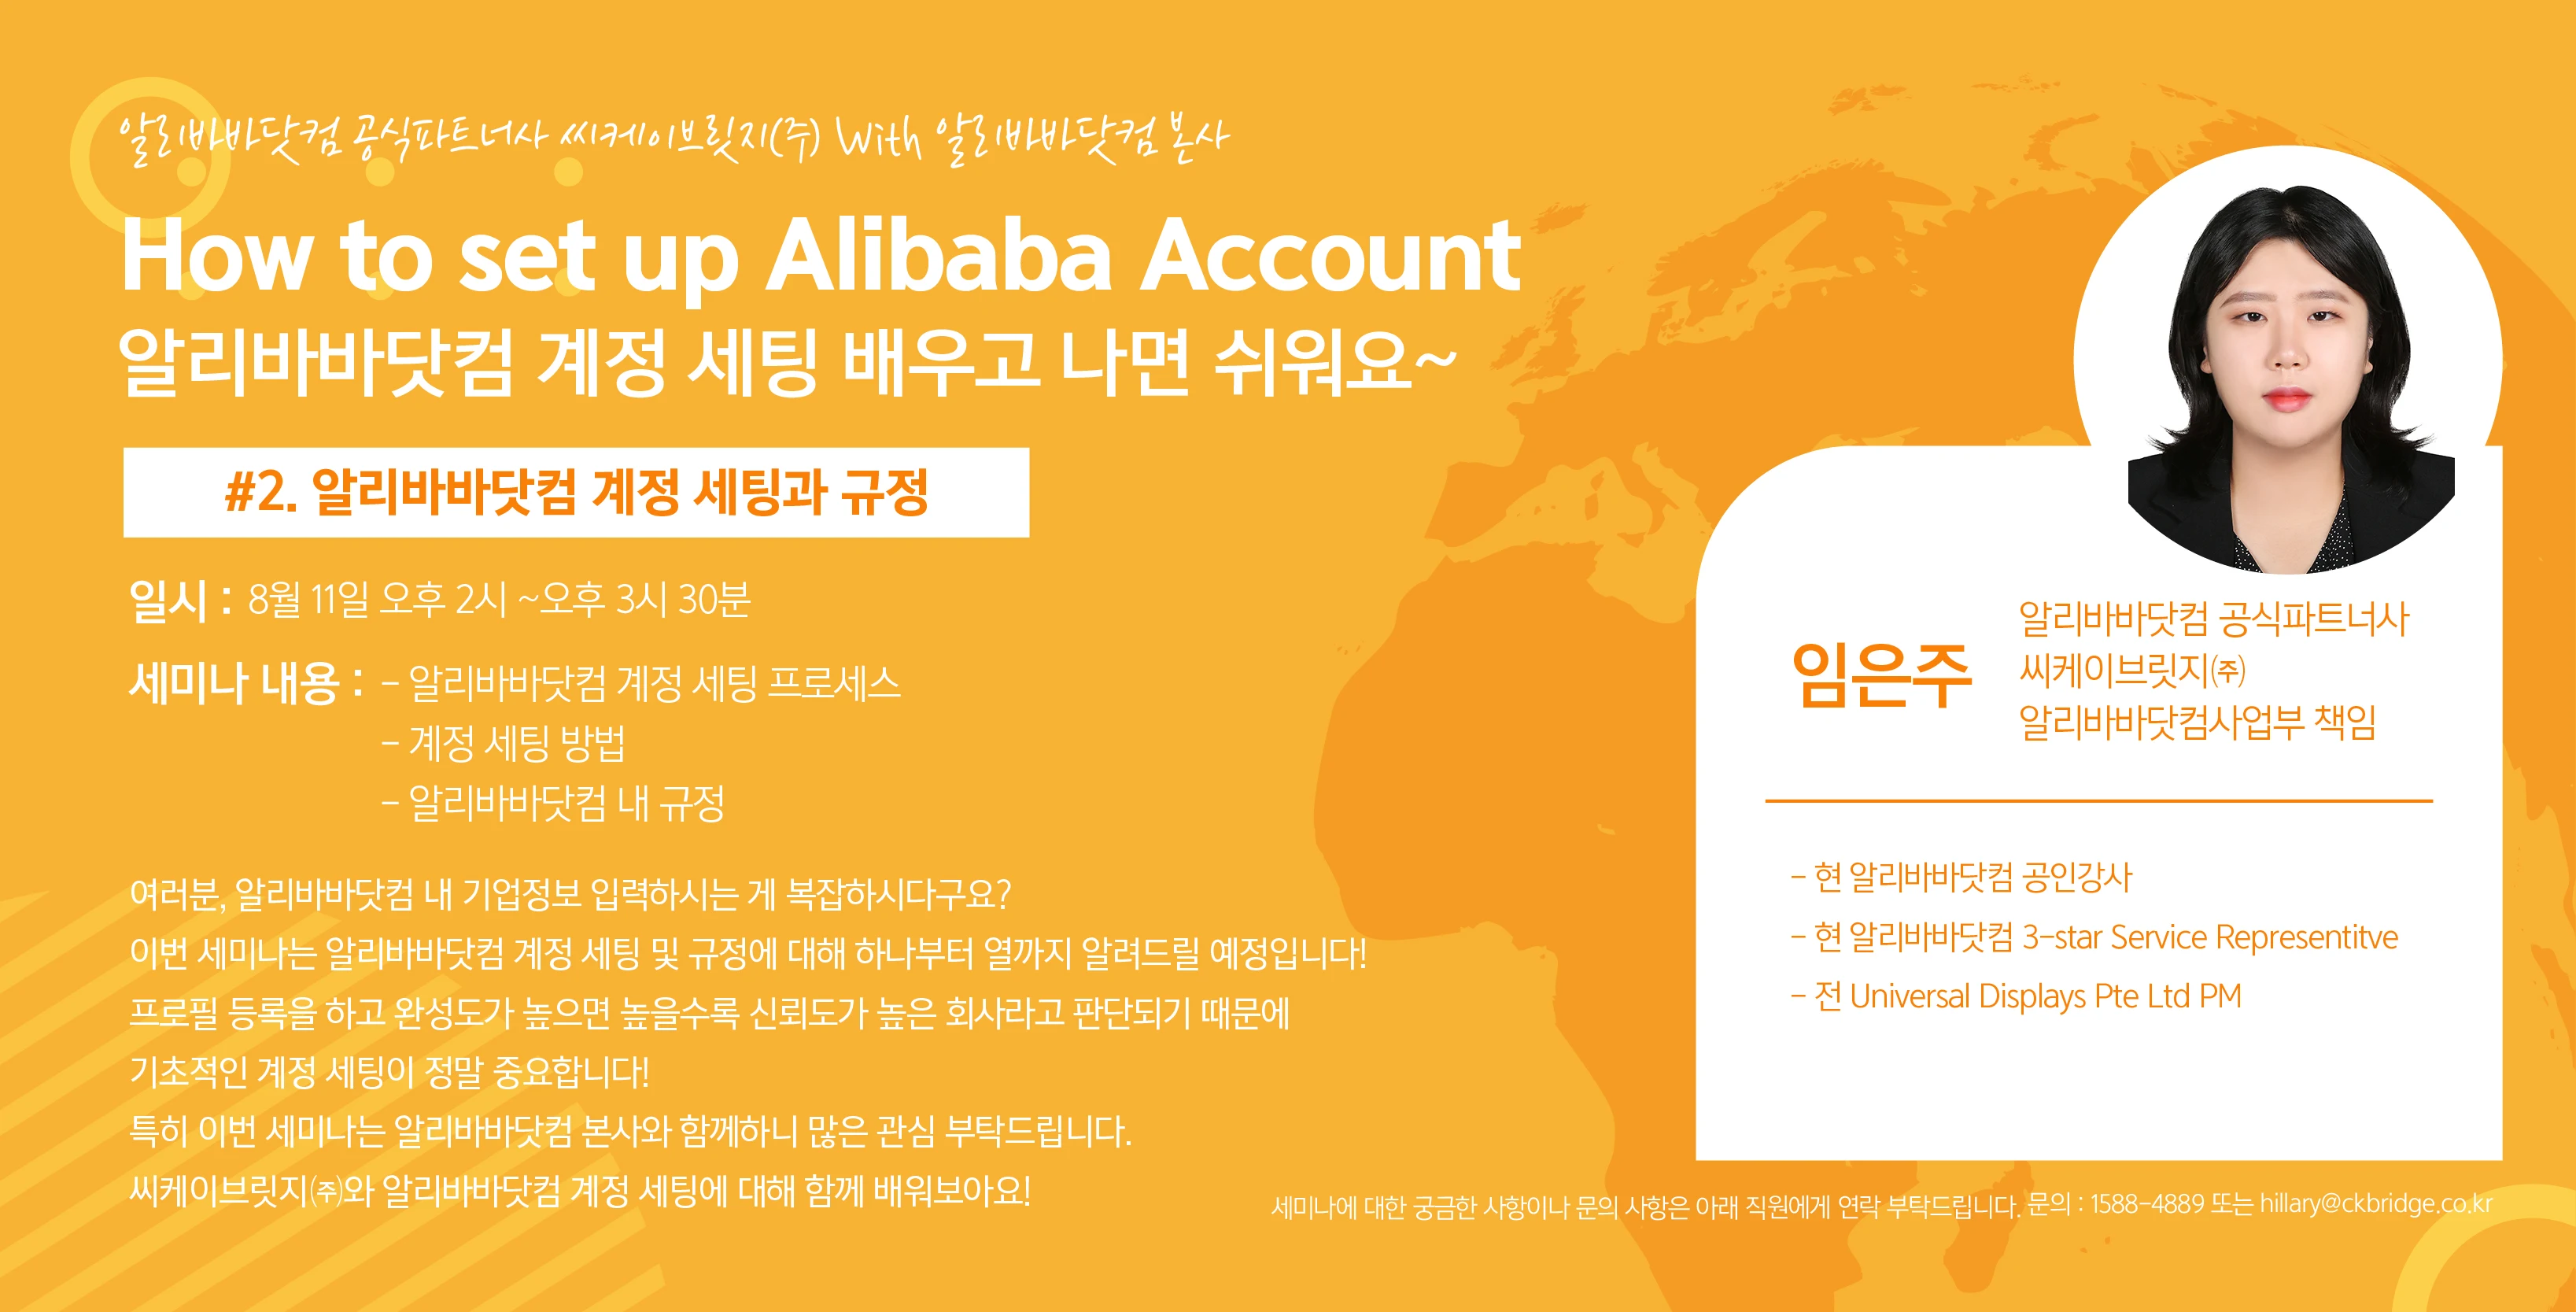 How to set up Alibaba Account